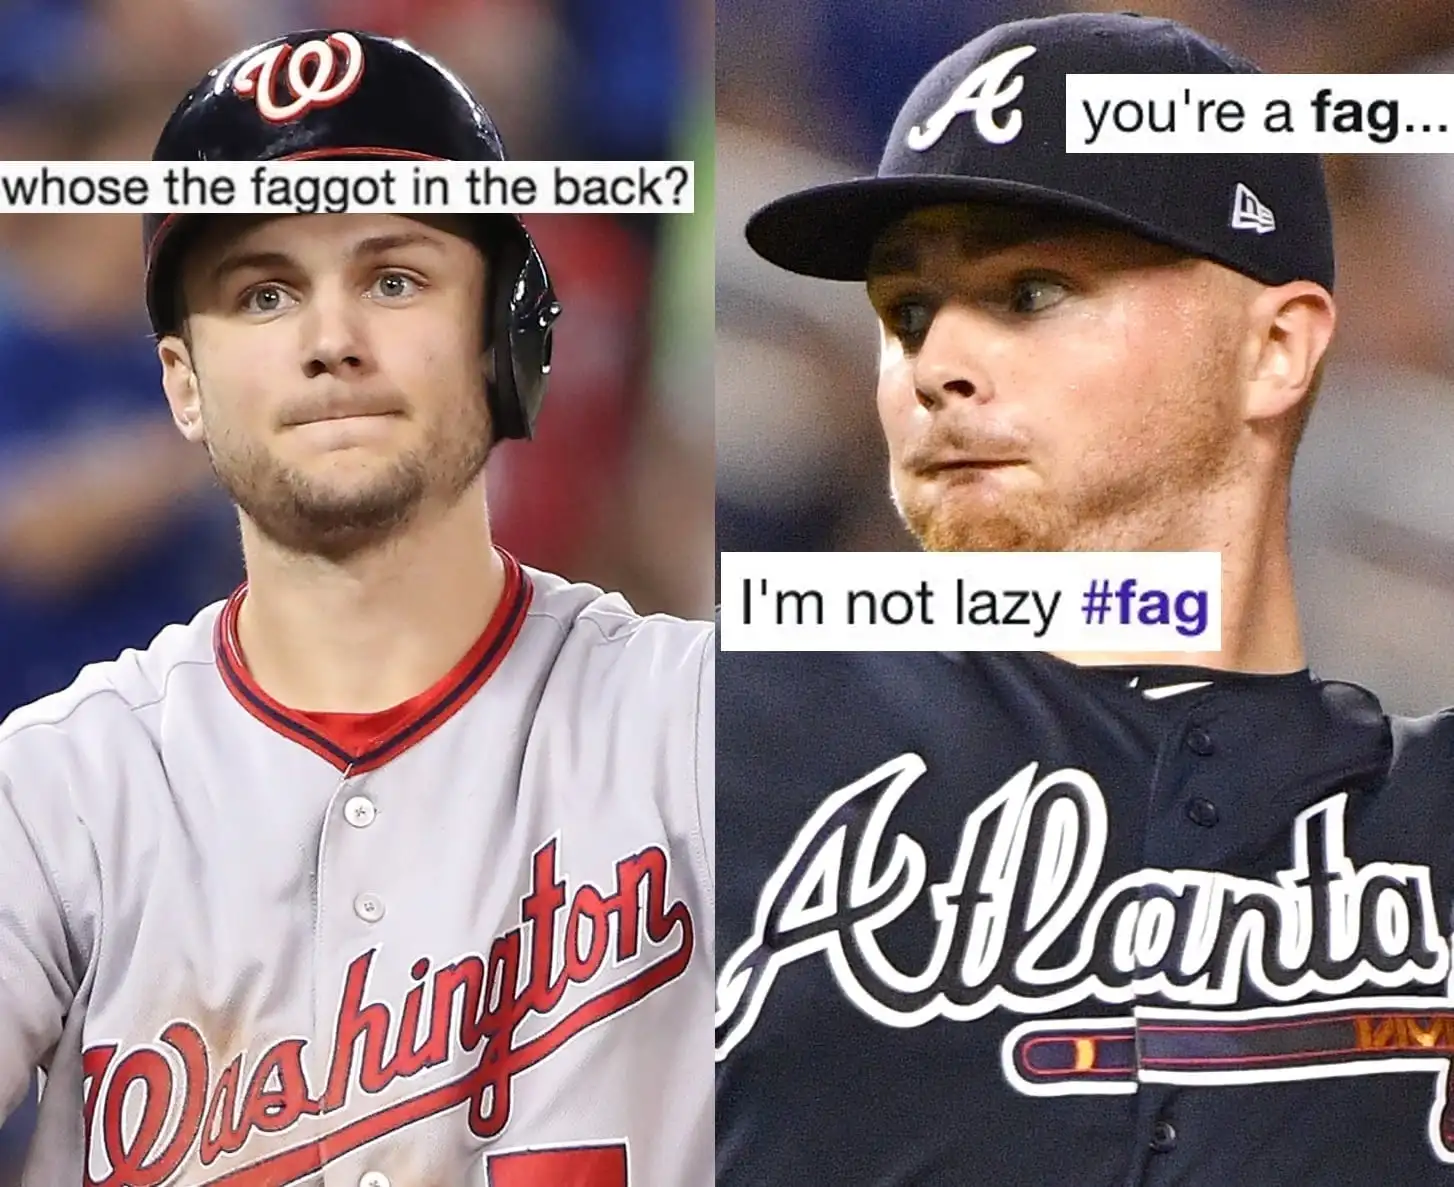 Nats player apologizes for anti-gay tweets